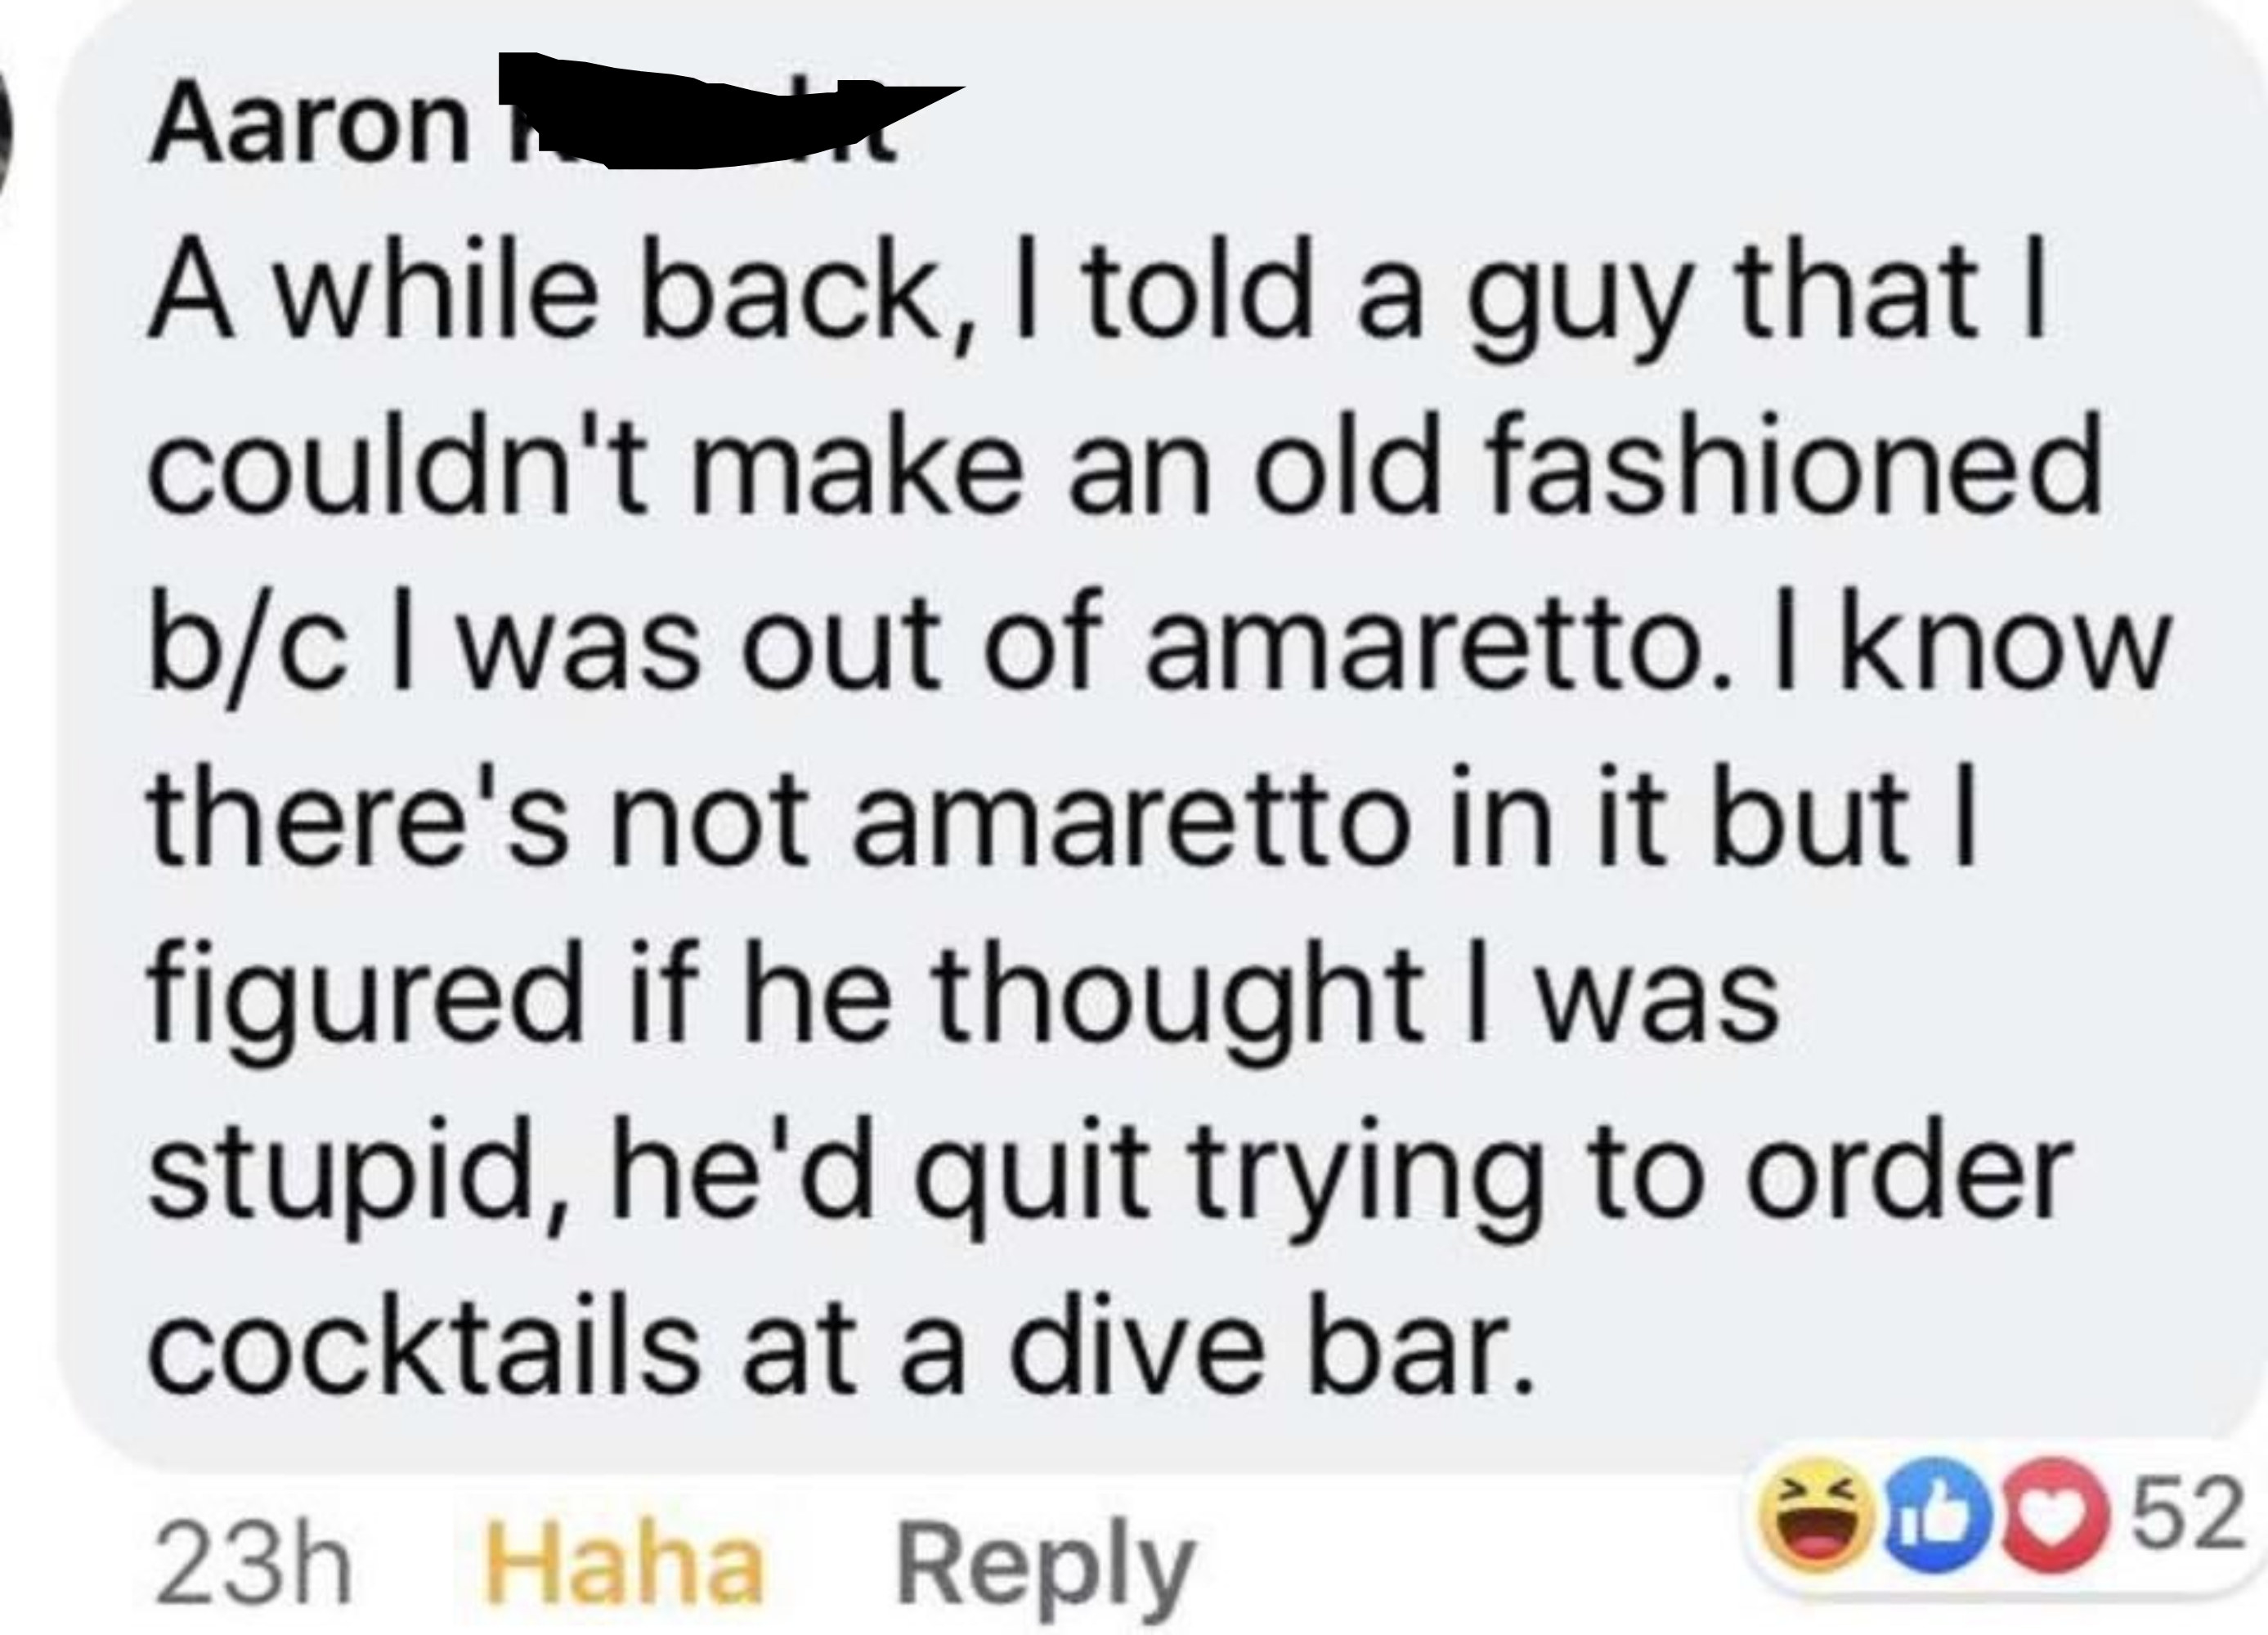 &quot;but I figured if he thought I was stupid, he&#x27;d quit trying to order cocktails at a dive bar&quot;